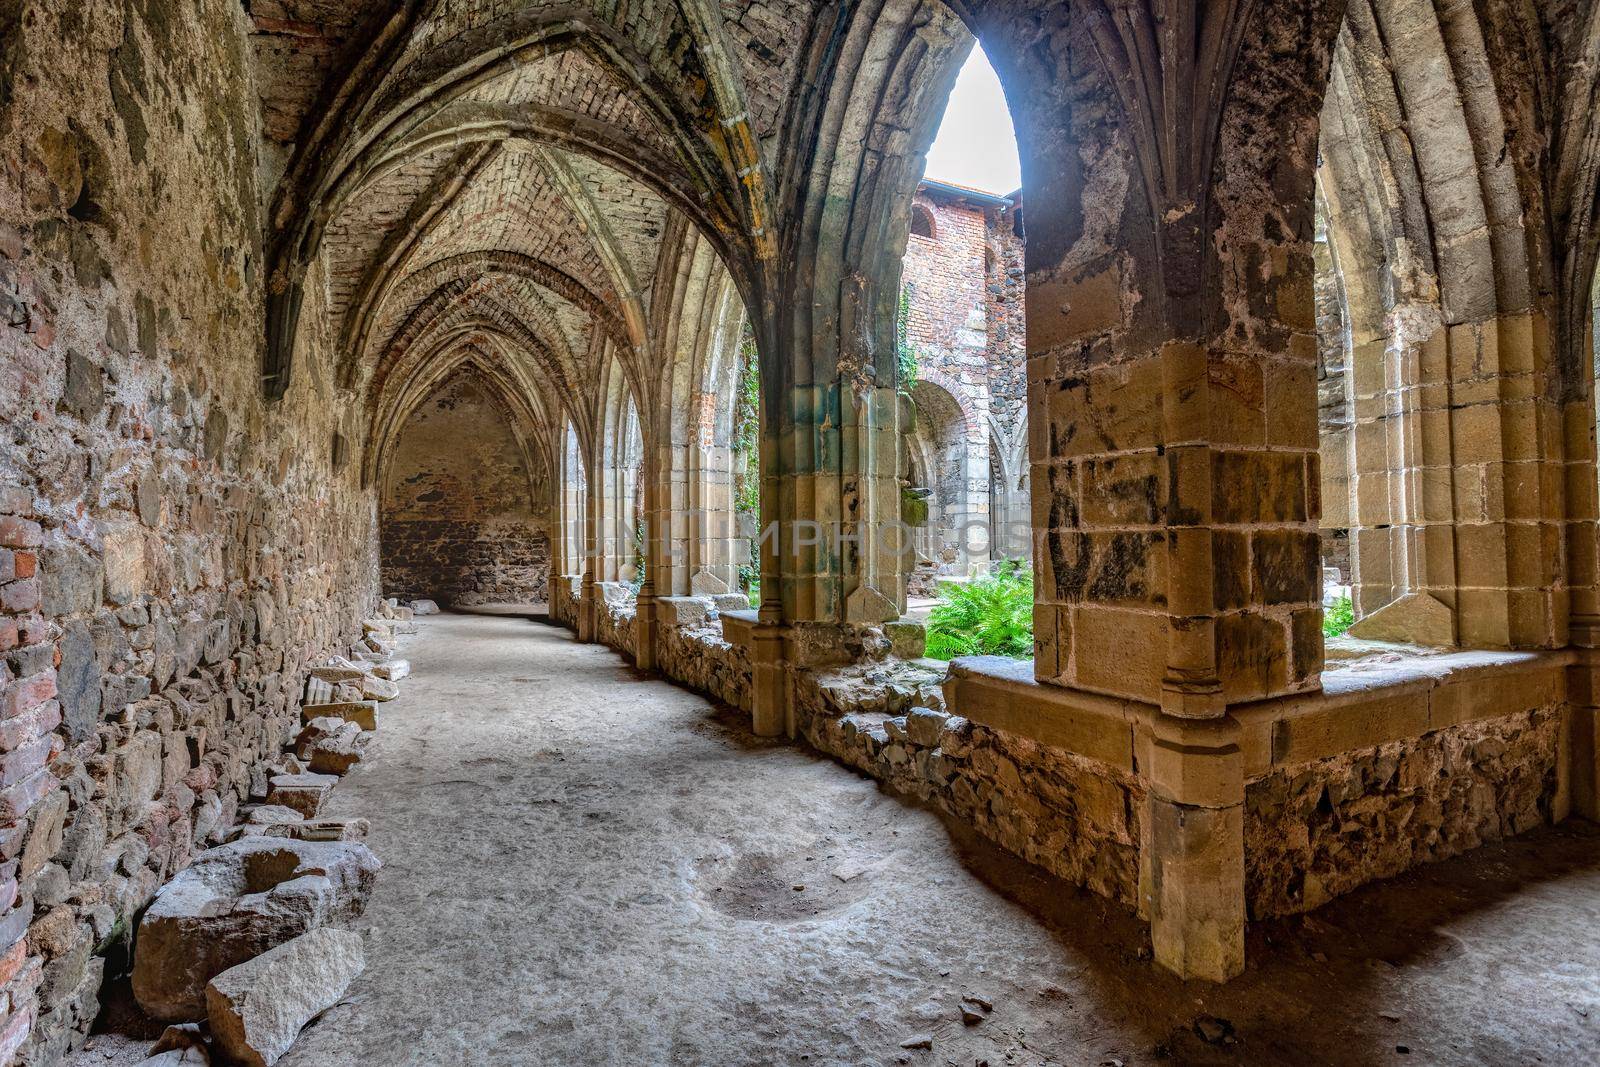 The Rosa Coeli monastery. Ancient catholic ruin of monastery near Dolni Kounice city. Religion gothic place with spiritual history builded from stone. Medieval and historical heritage. Czech Republic